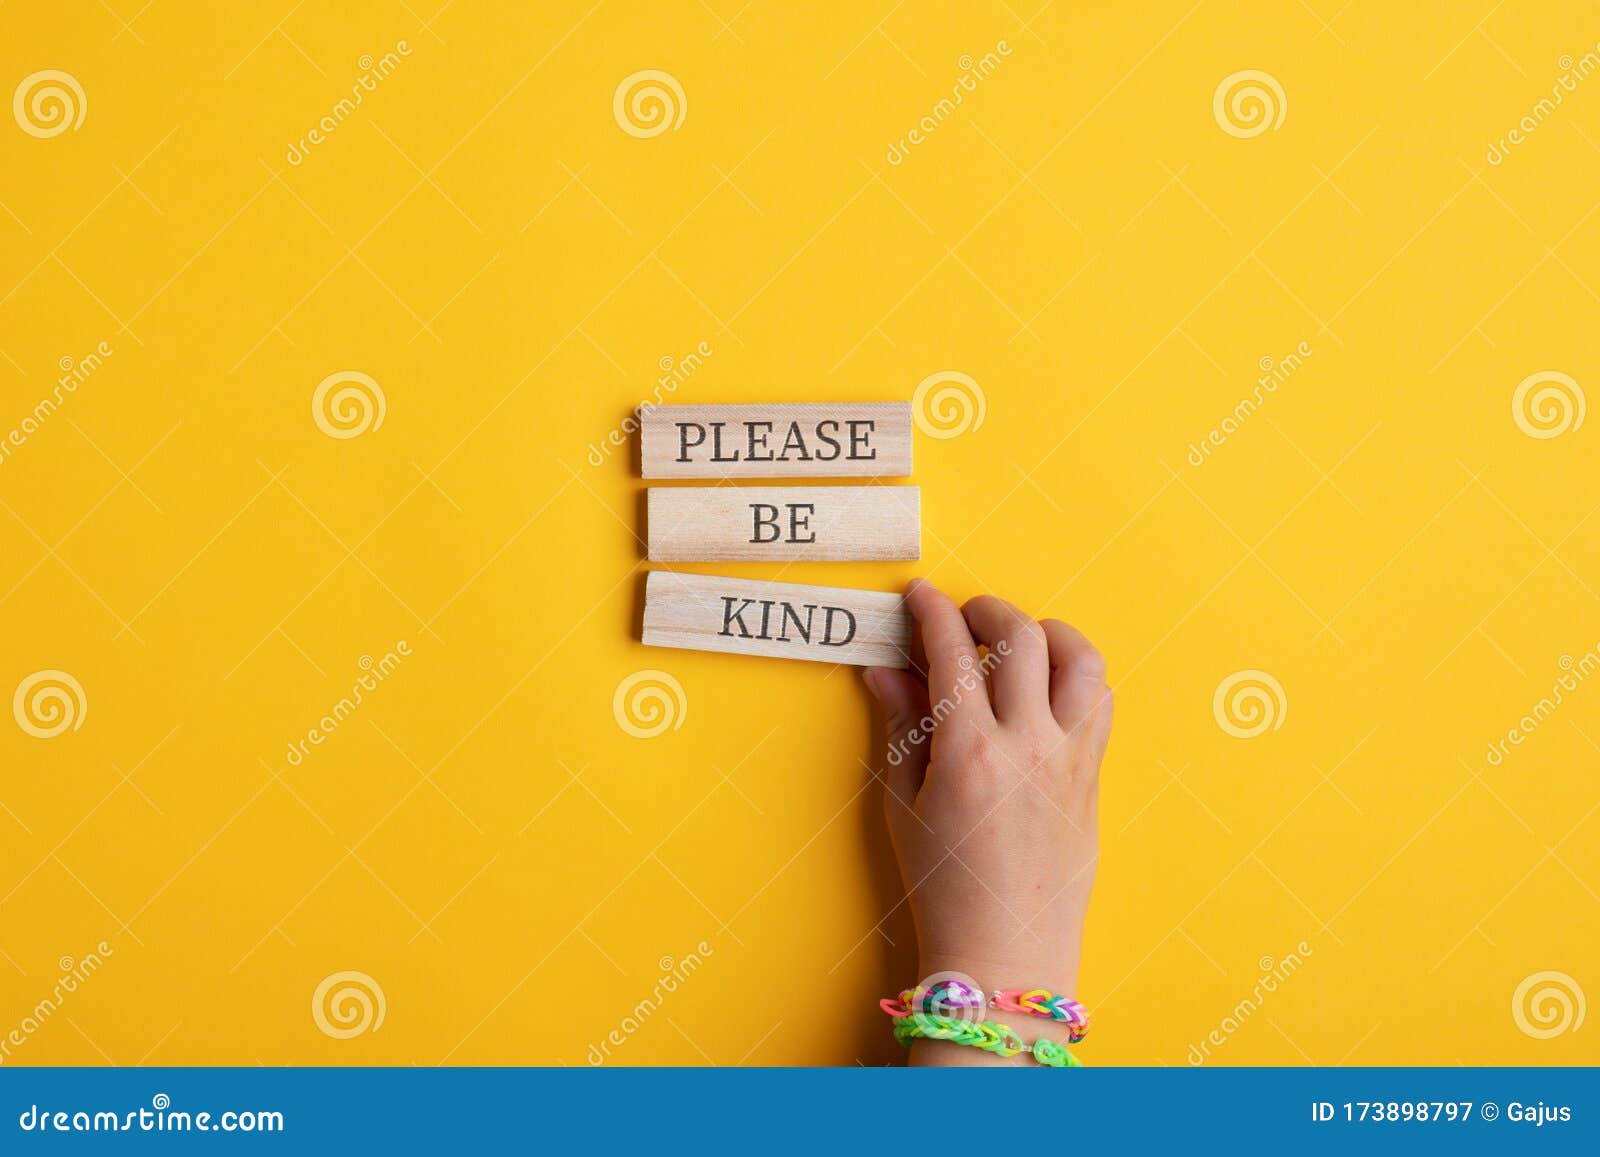 please be kind sign